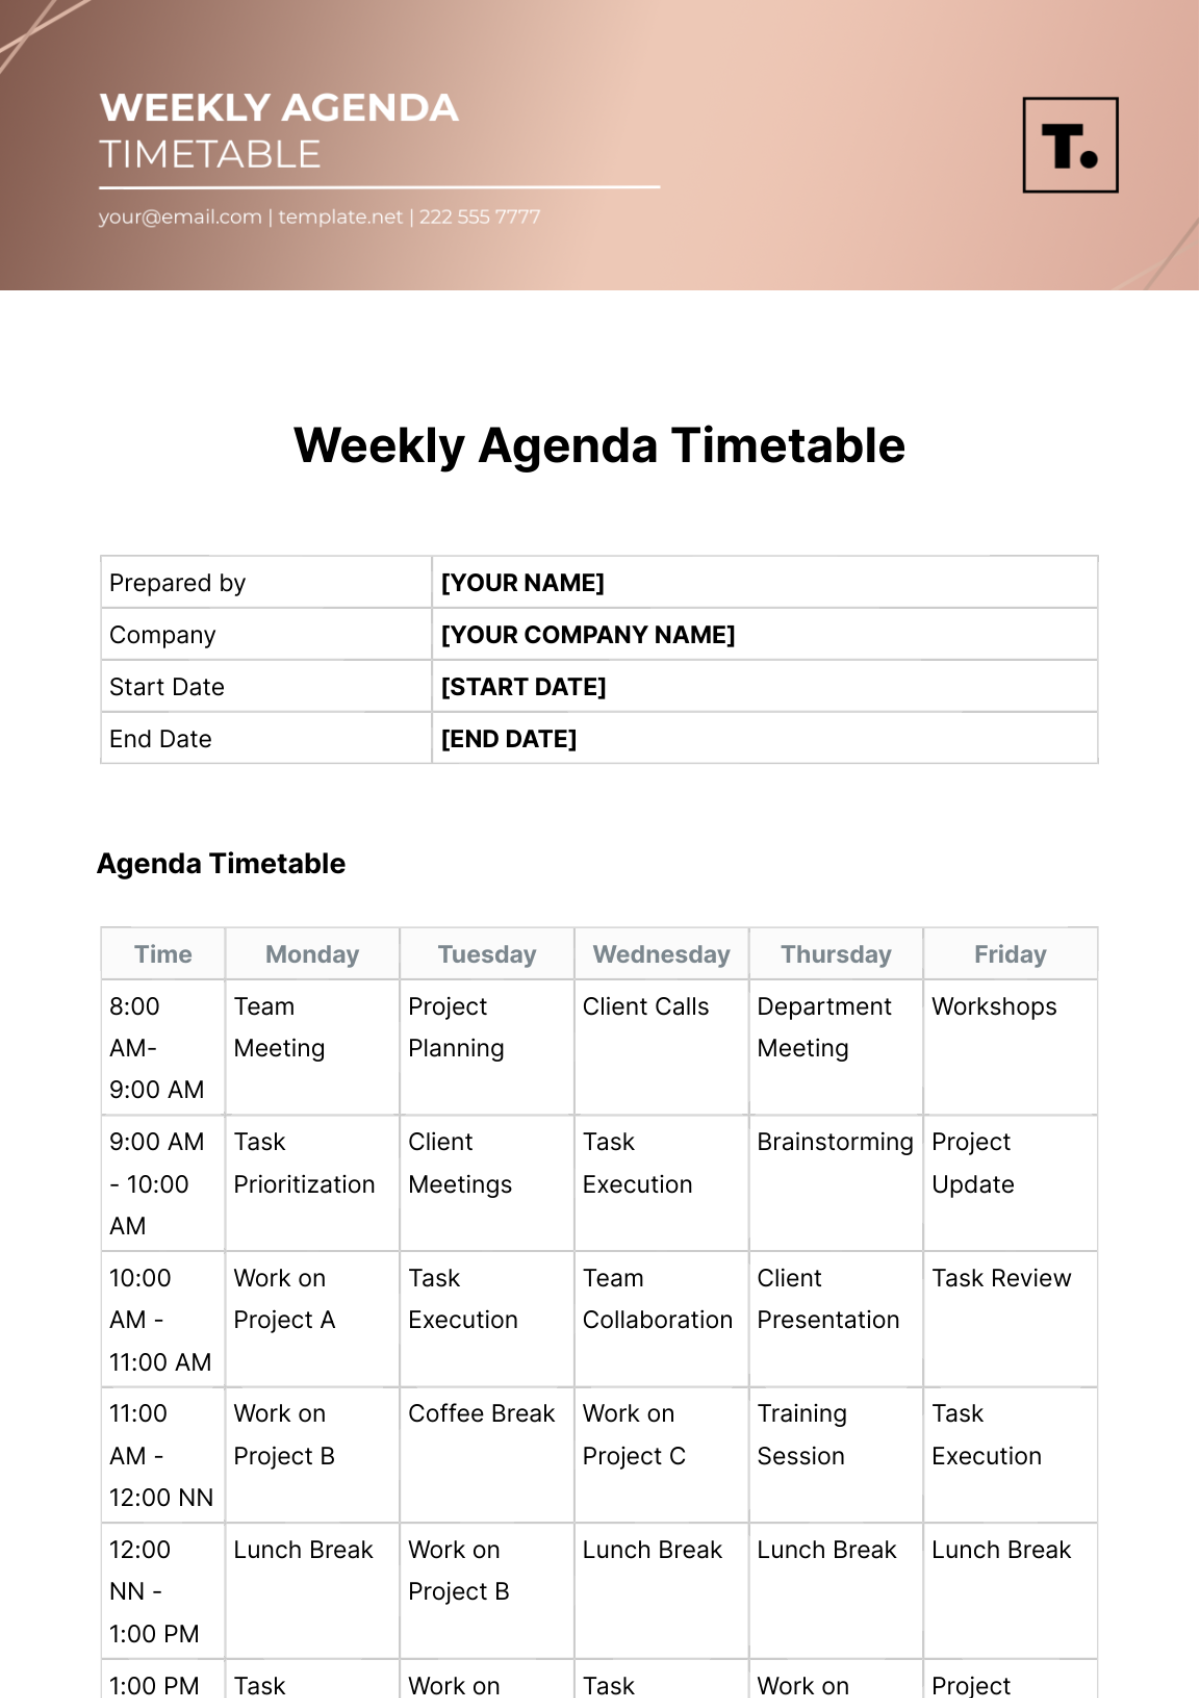 Free Weekly Agenda Timetable Template